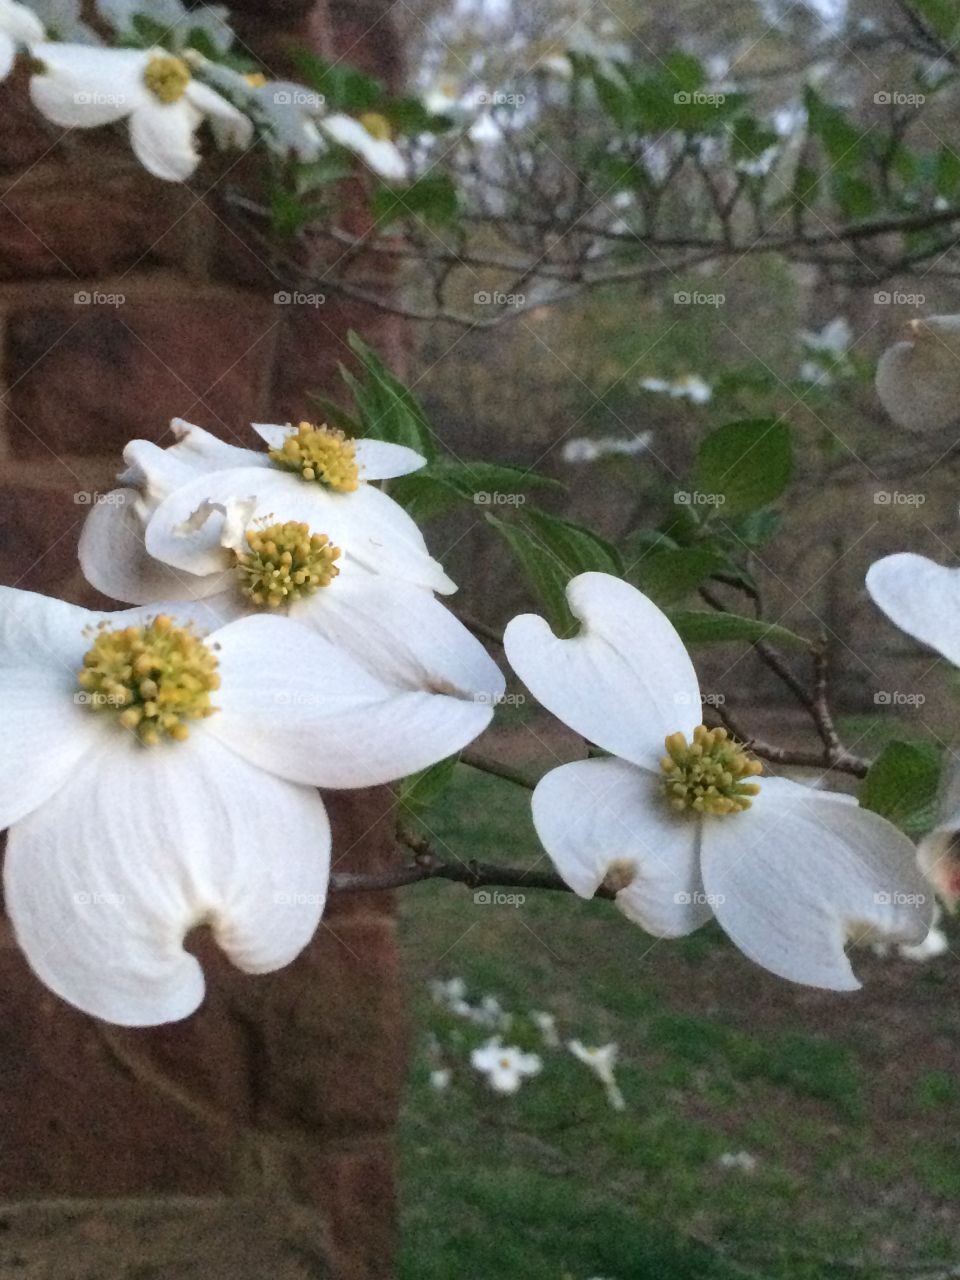 Freshly-bloomed Virginia Dogwood flowers, the State Flower of VA and the most beautiful flower on earth